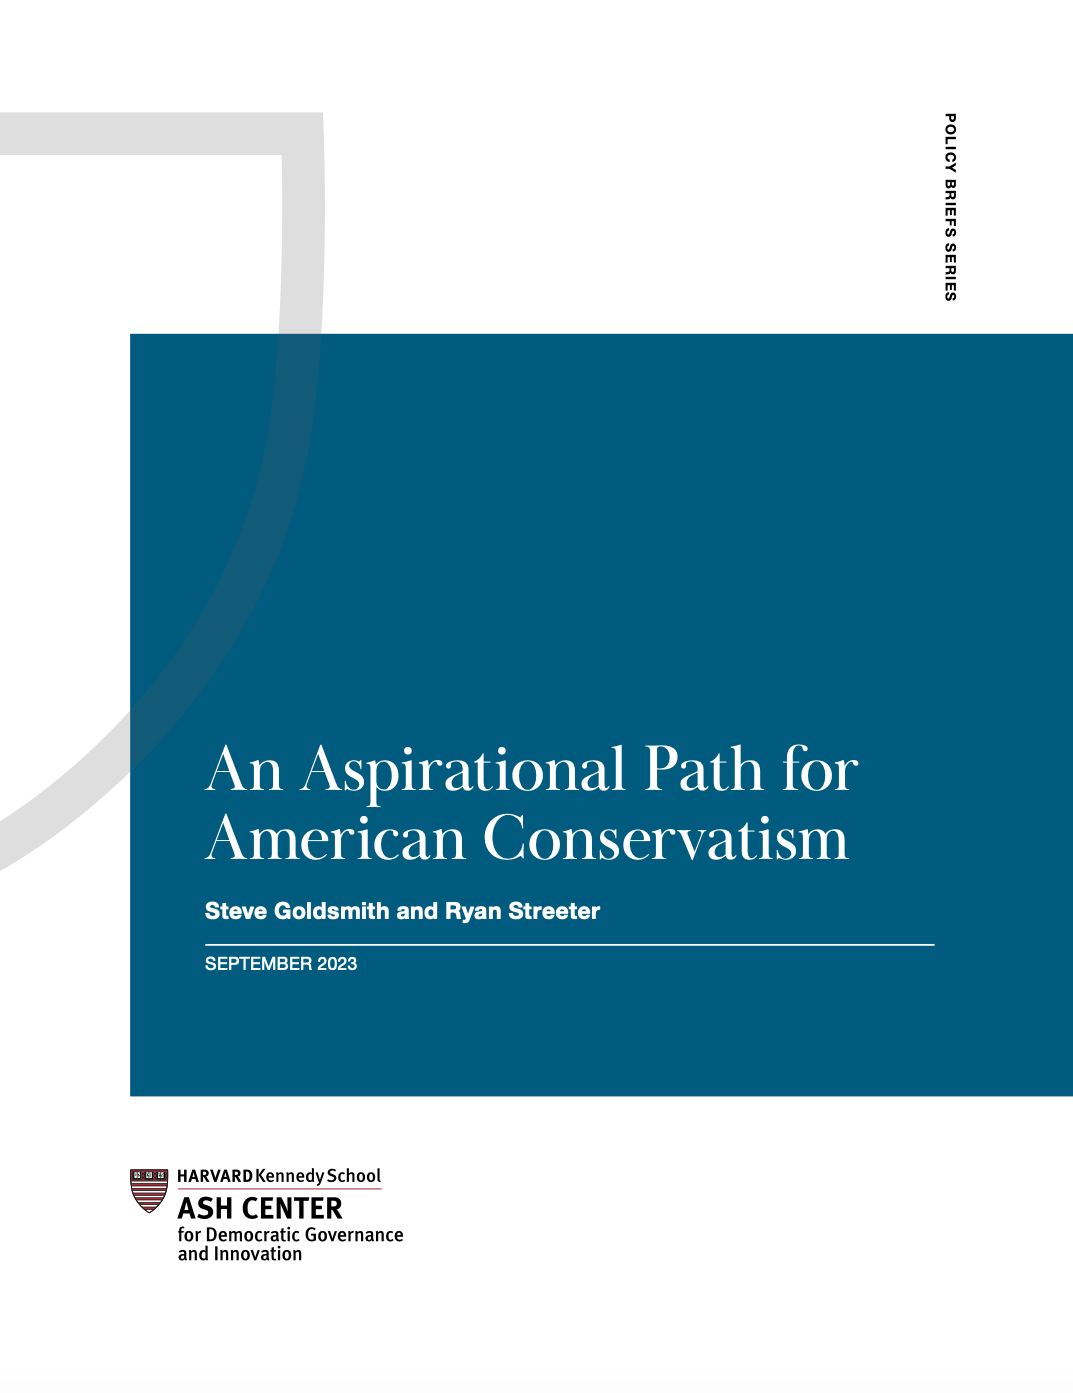 An Aspirational Path for American Conservatism